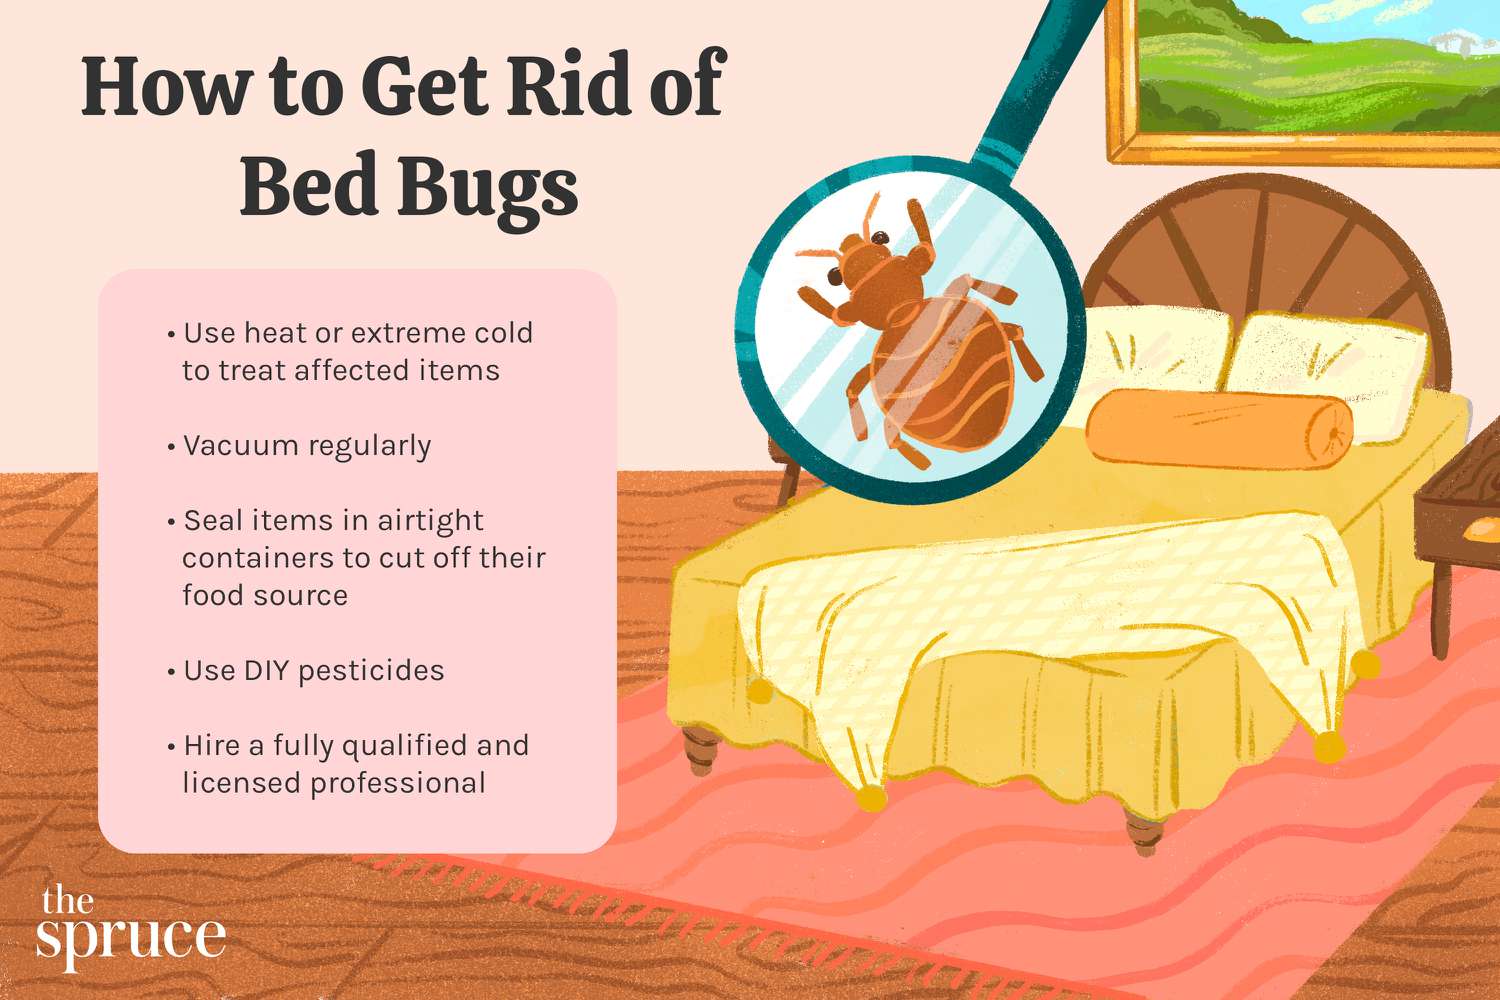 How to Kill Bed Bugs